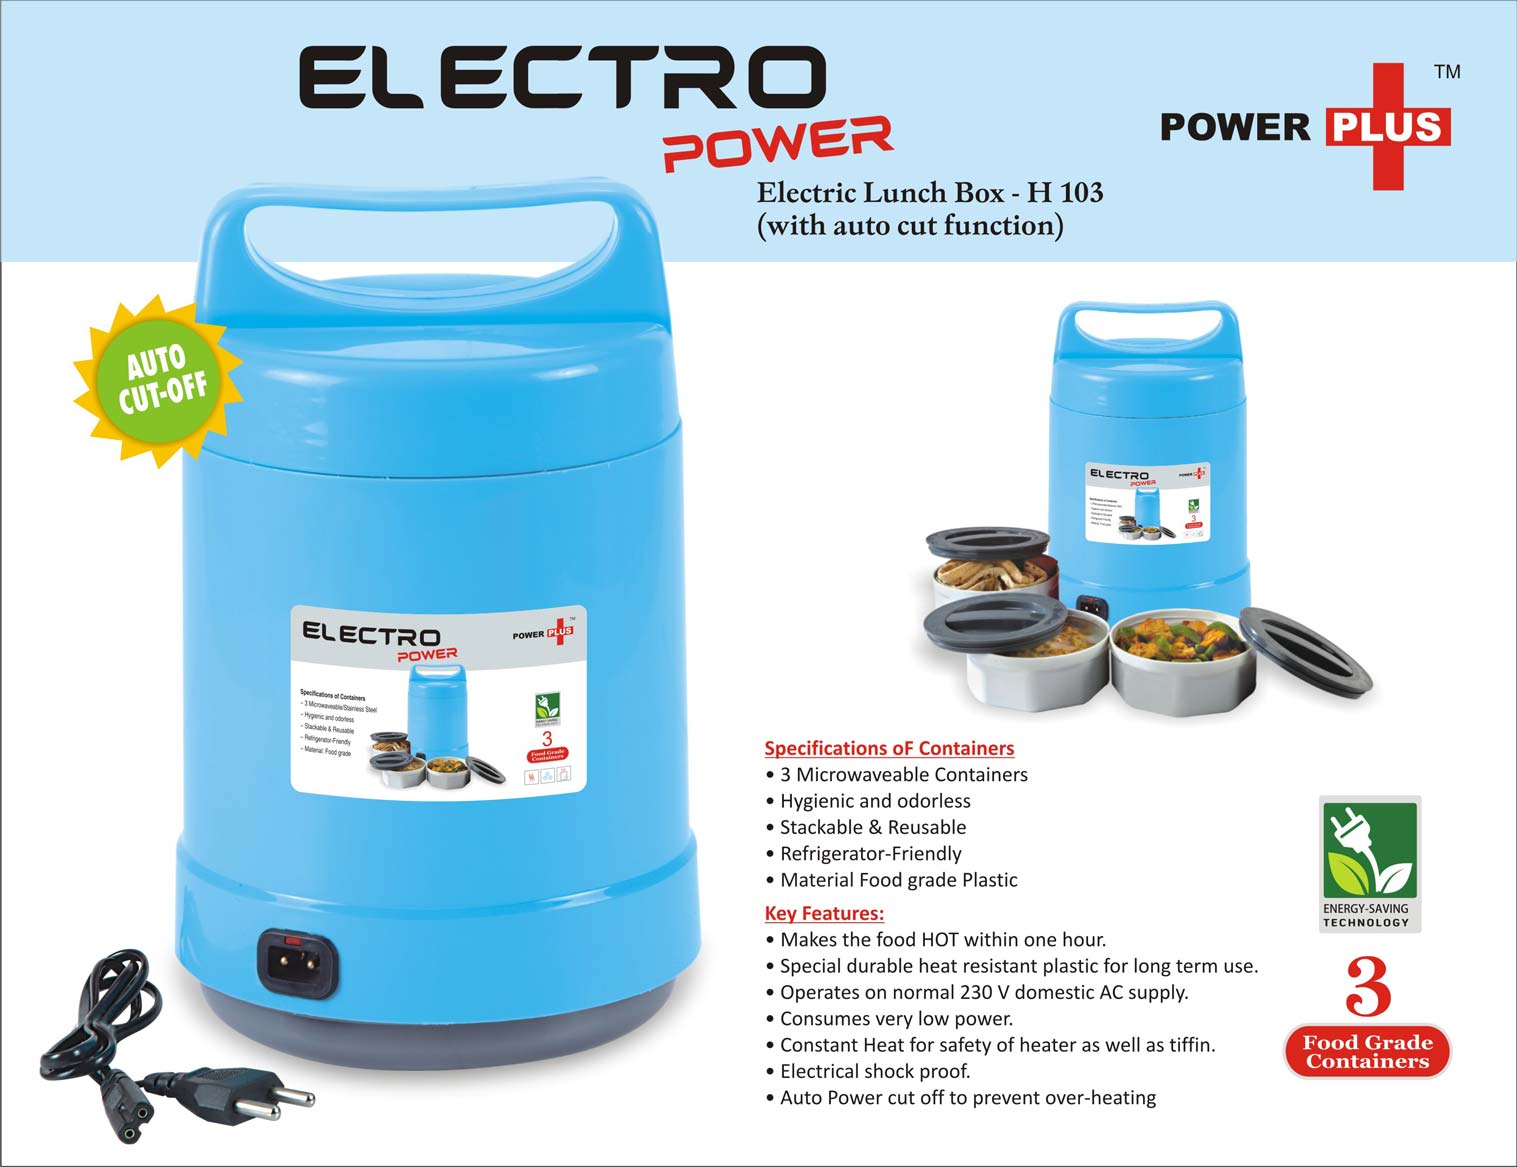 Electro Power Electric Lunch Box - Blue Color with Auto-Cut Function